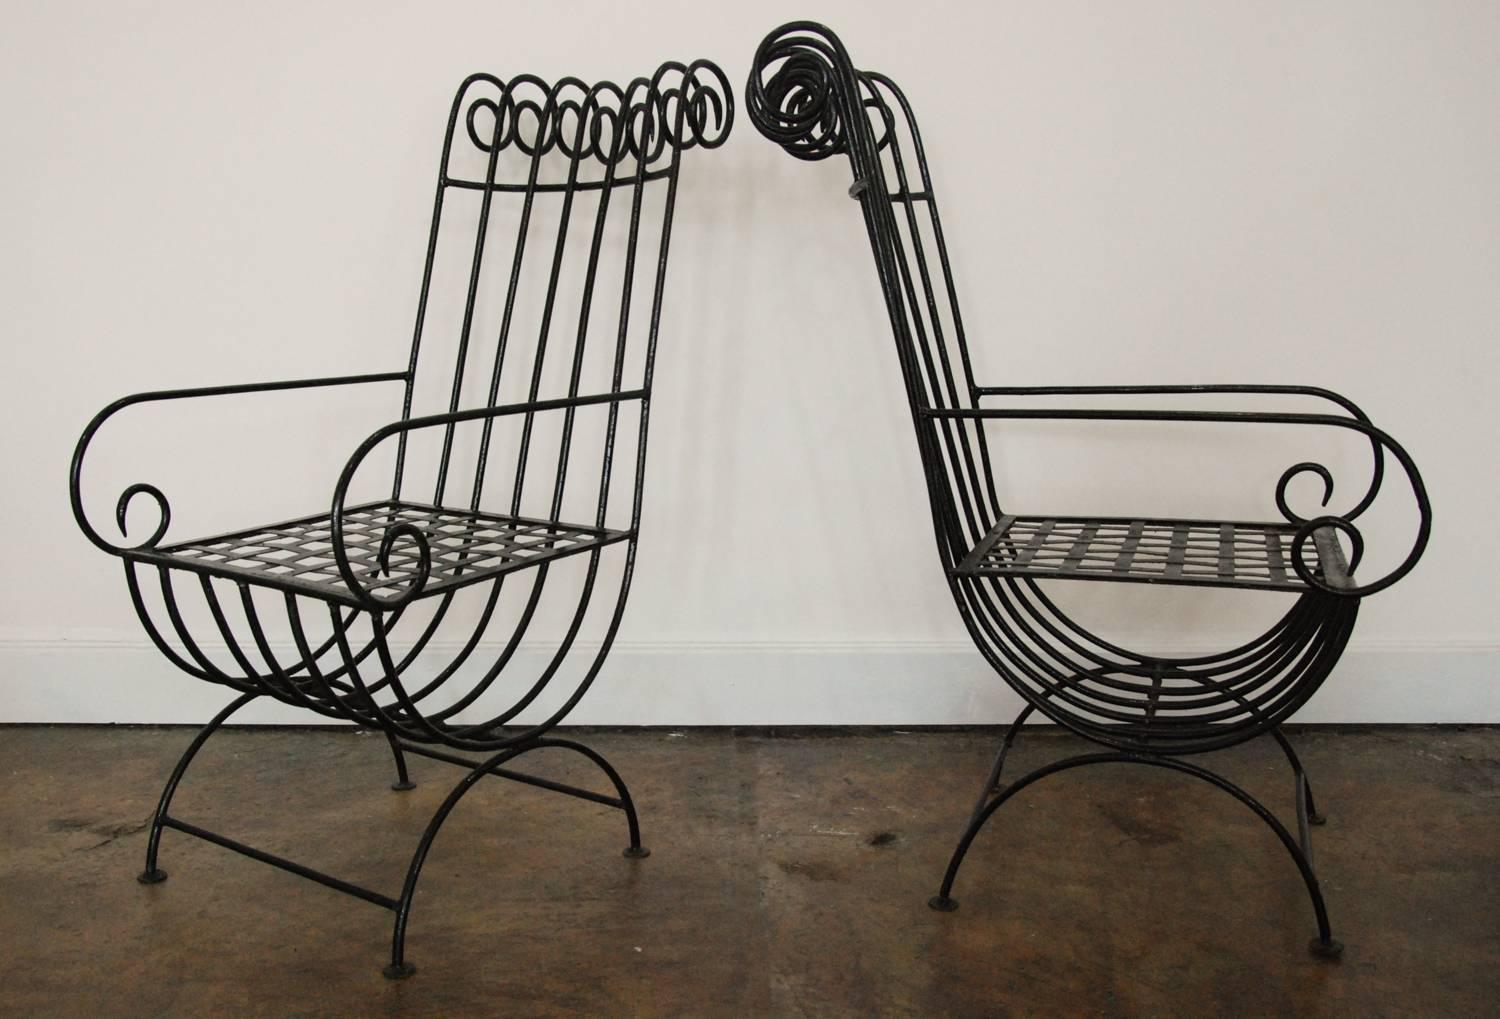 Pair of Highback, French, 1940s Style Forged Iron Garden Chairs, France In Excellent Condition For Sale In Richmond, VA